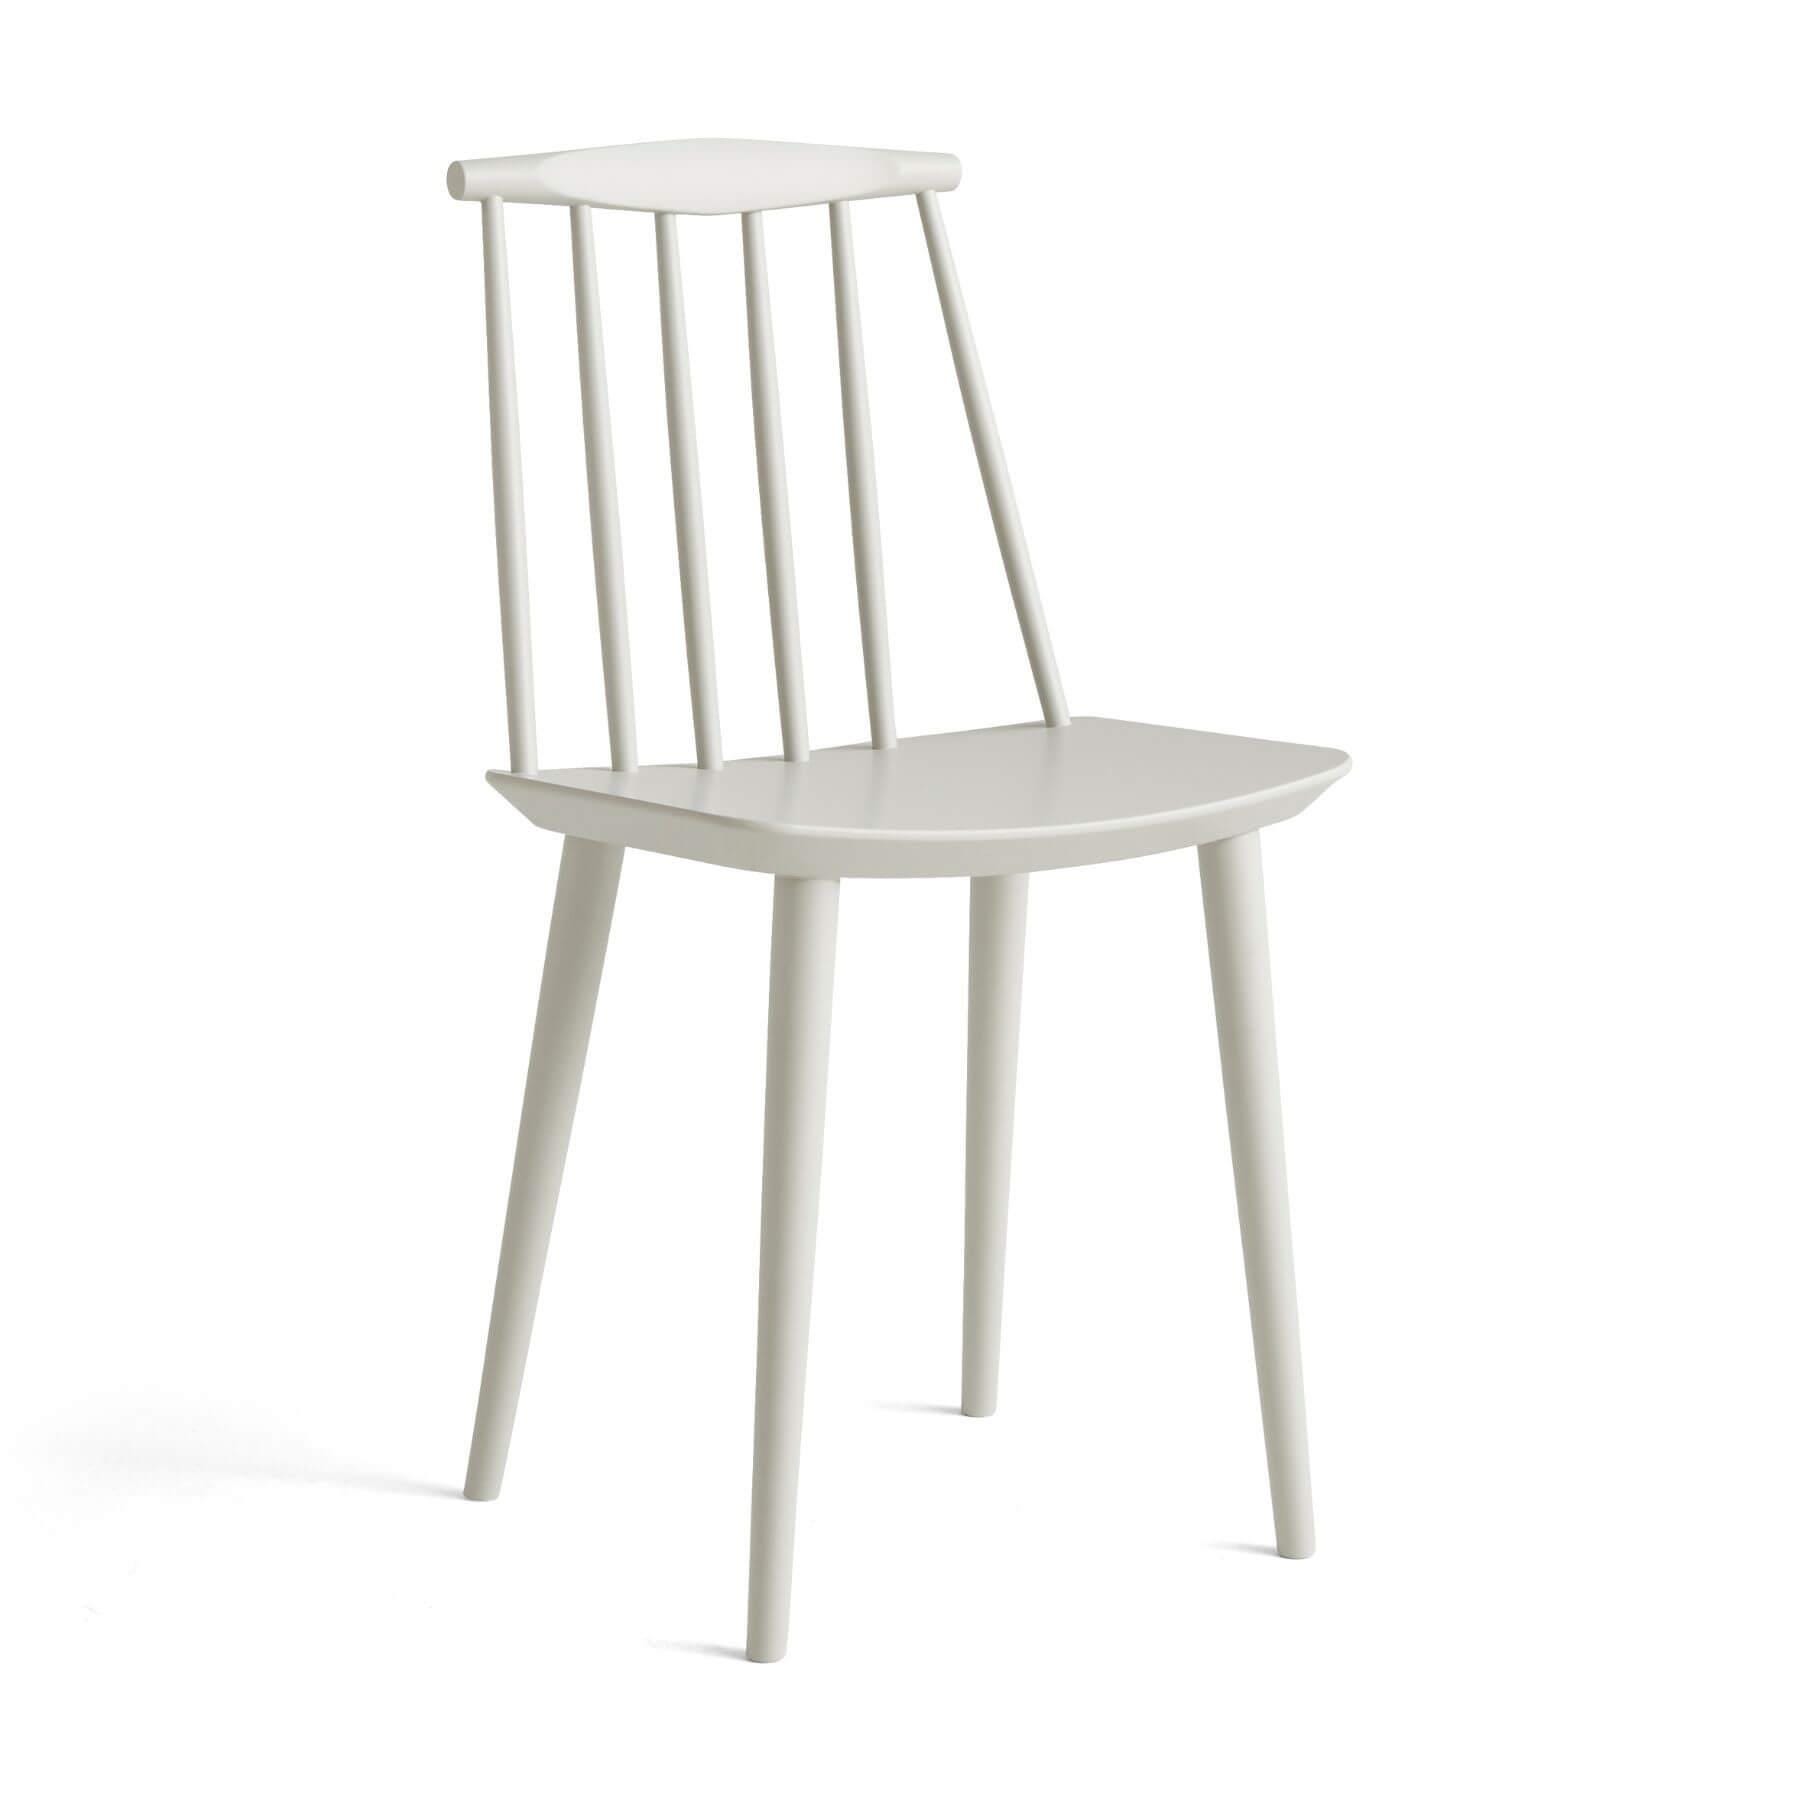 Hay Jseries 77 Dining Chair Beech Lacquered Grey Green Designer Furniture From Holloways Of Ludlow